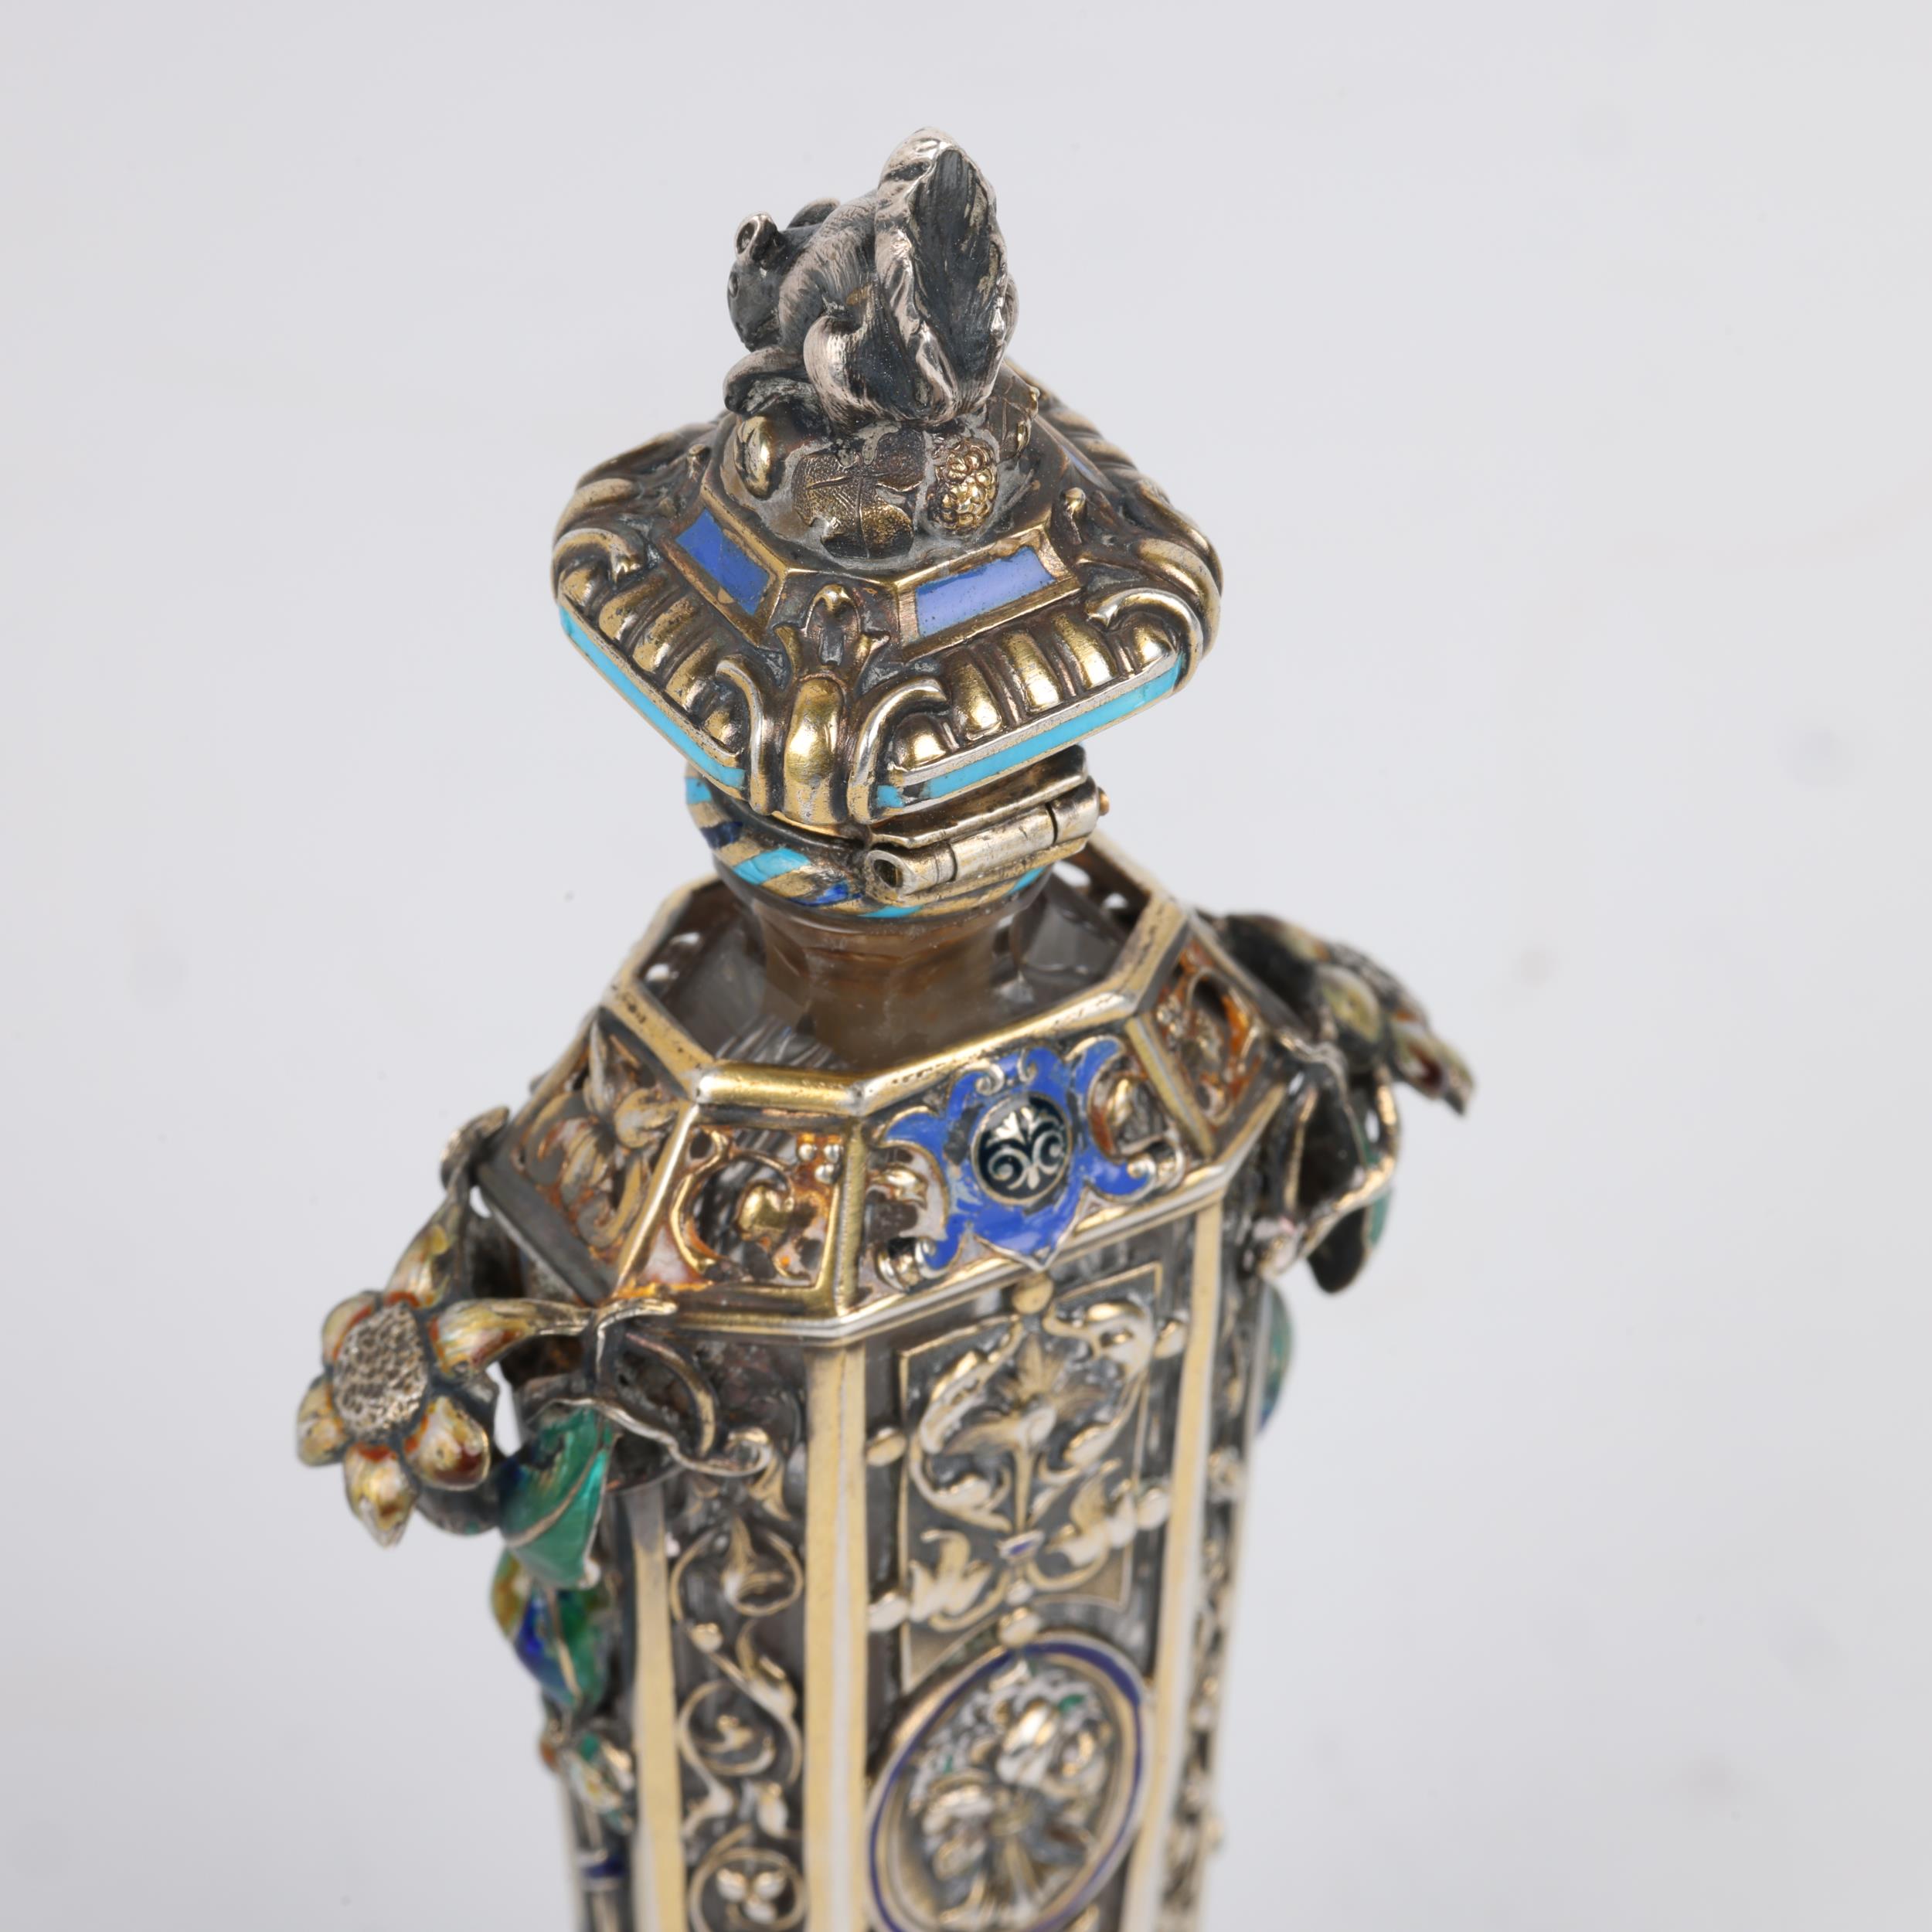 A Fine 19th century French silver-gilt mounted glass and enamel scent bottle, Jean-Valentin Morel, - Image 2 of 3